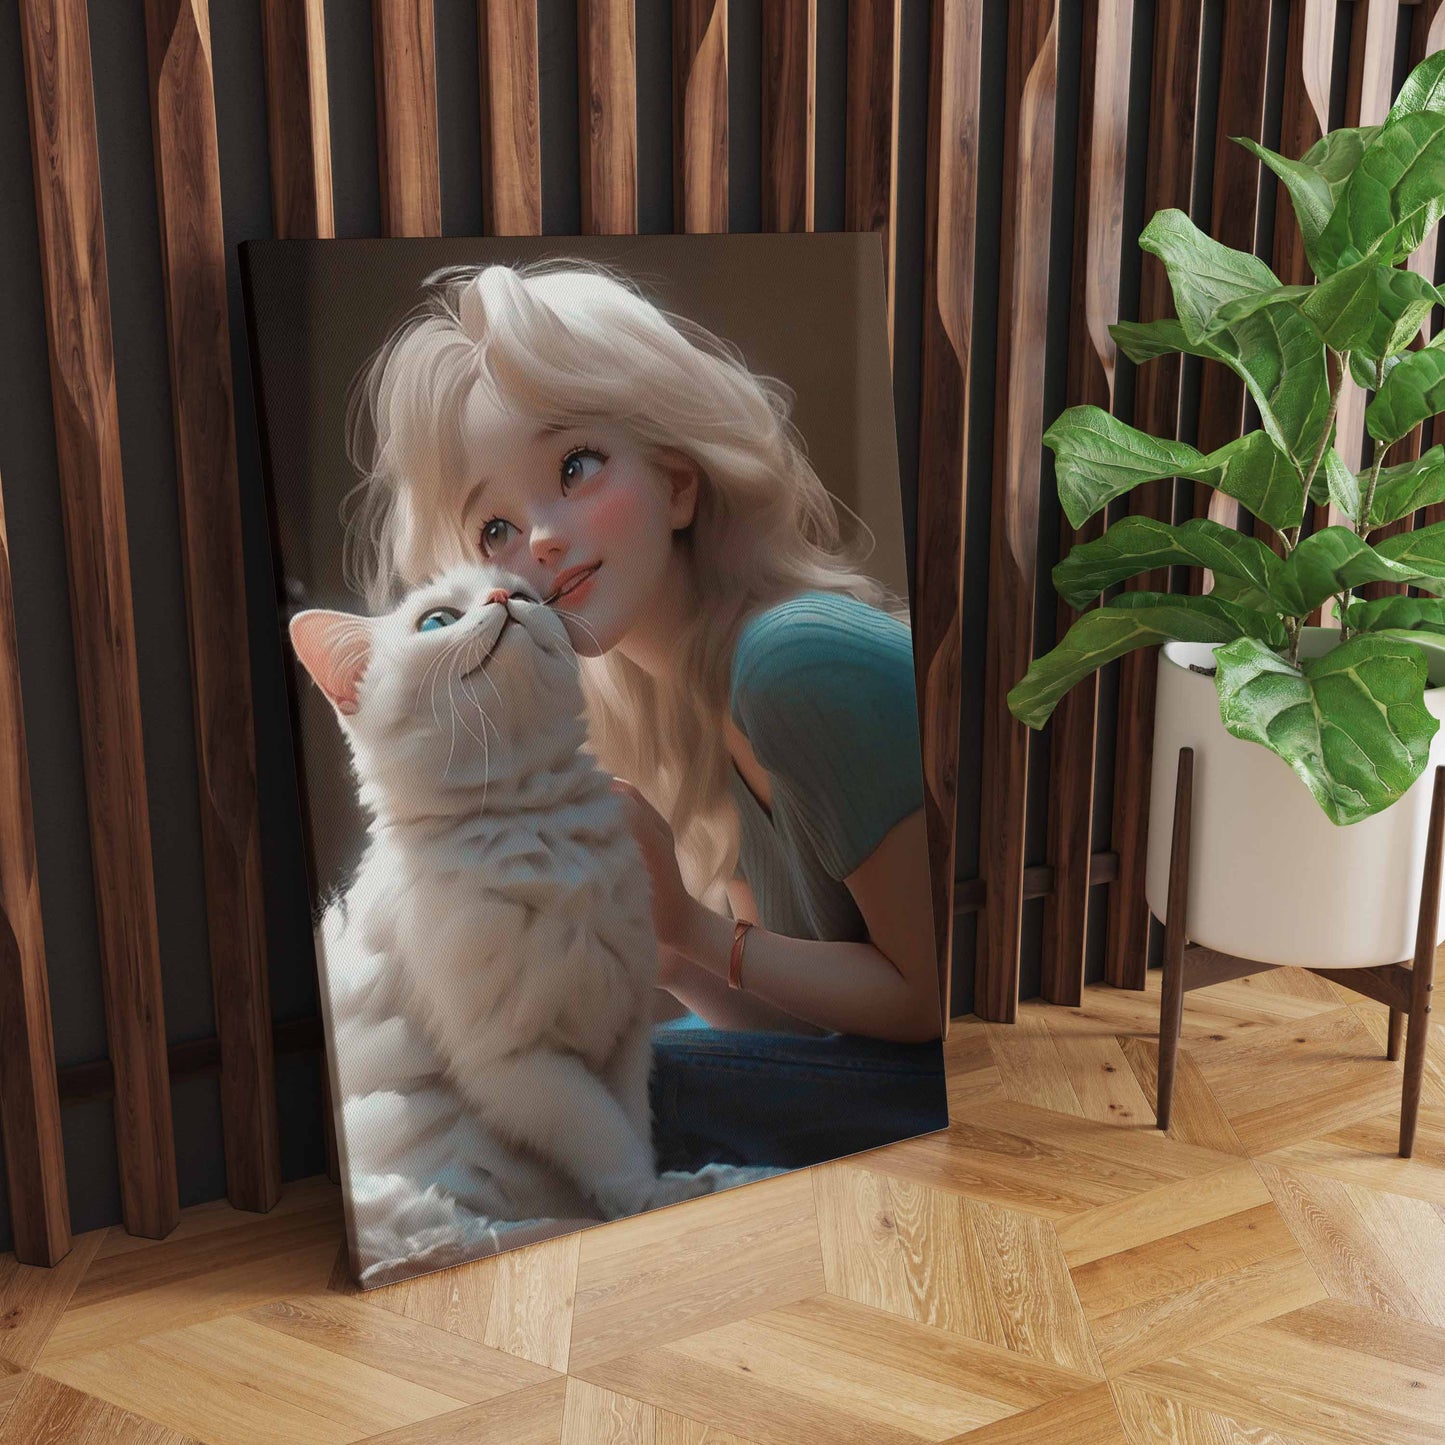 Harmonious Play: A Captivating Scene of a Girl and Her Beloved White Cat Frolicking Together - S10E04